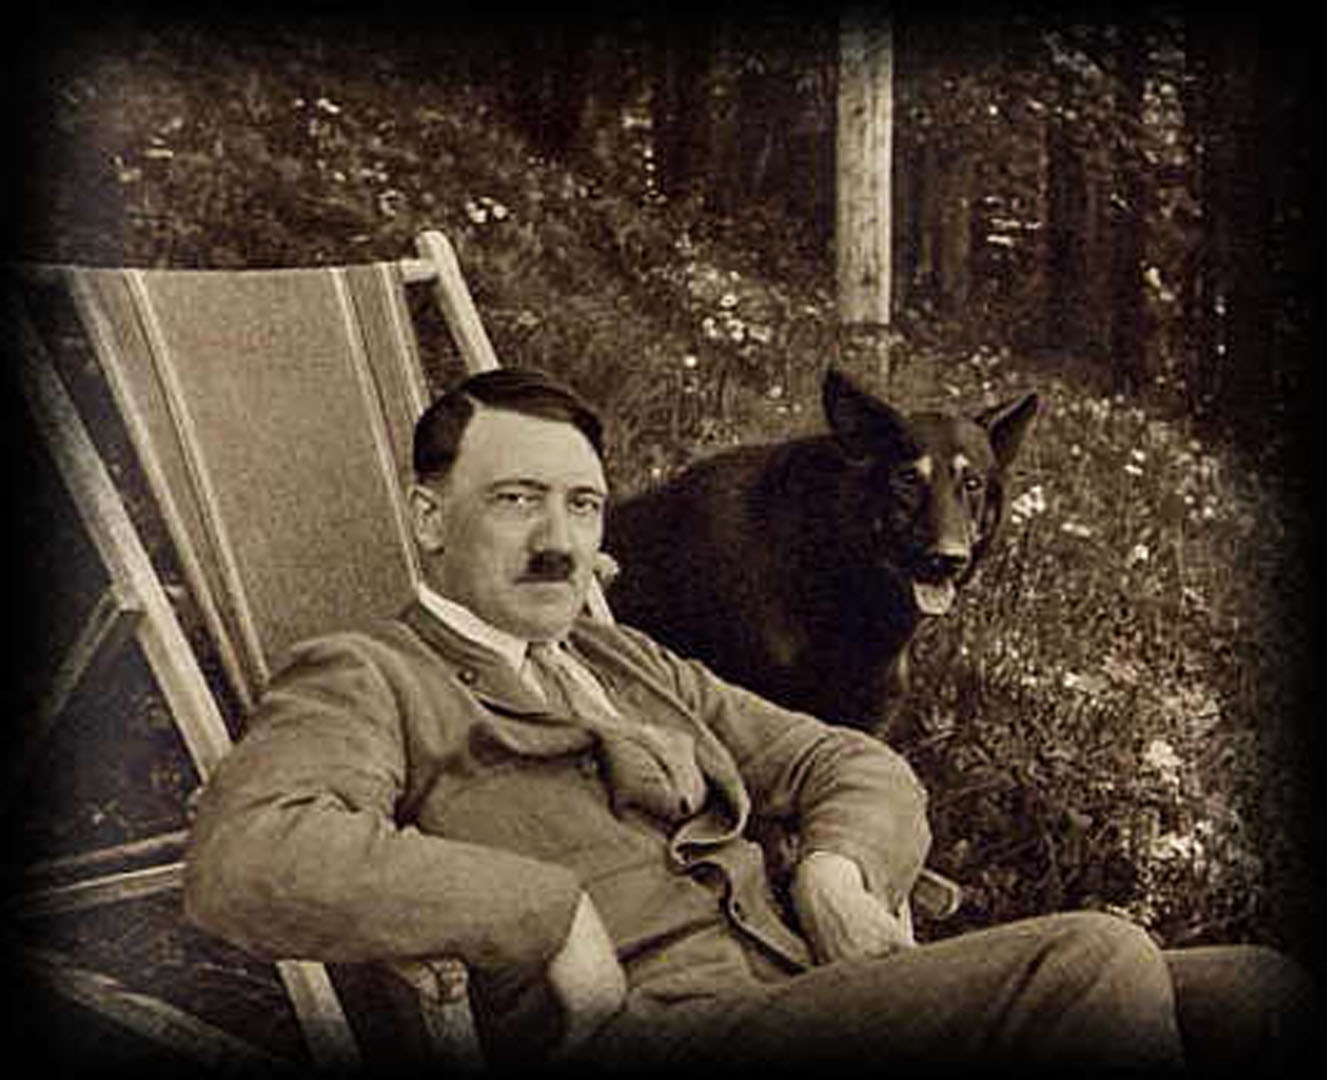 Hitler Sitting On Deck Chair Next To Dog